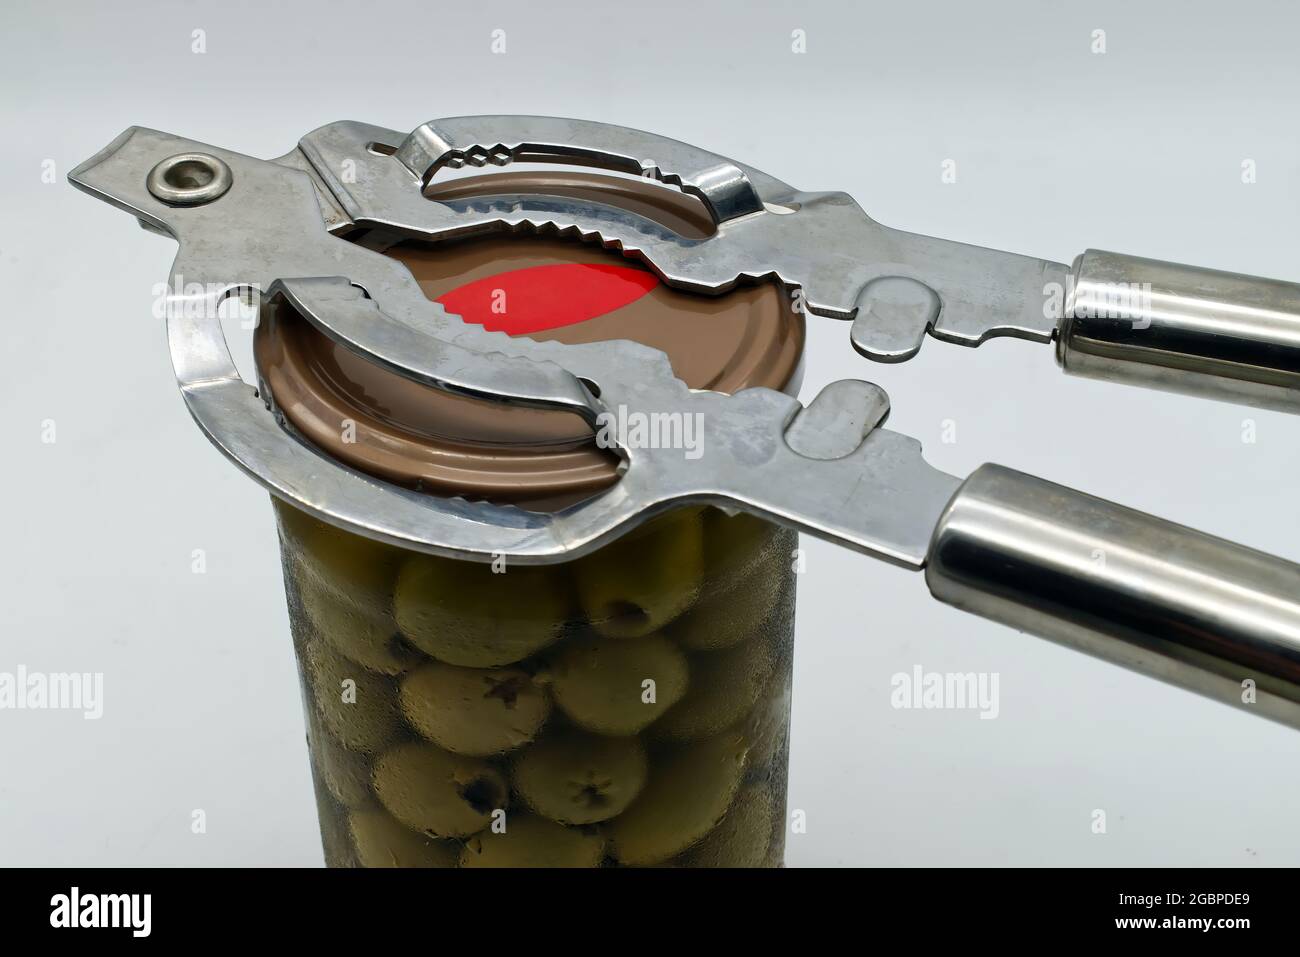 https://c8.alamy.com/comp/2GBPDE9/metal-jar-opener-isolated-on-white-background-2GBPDE9.jpg